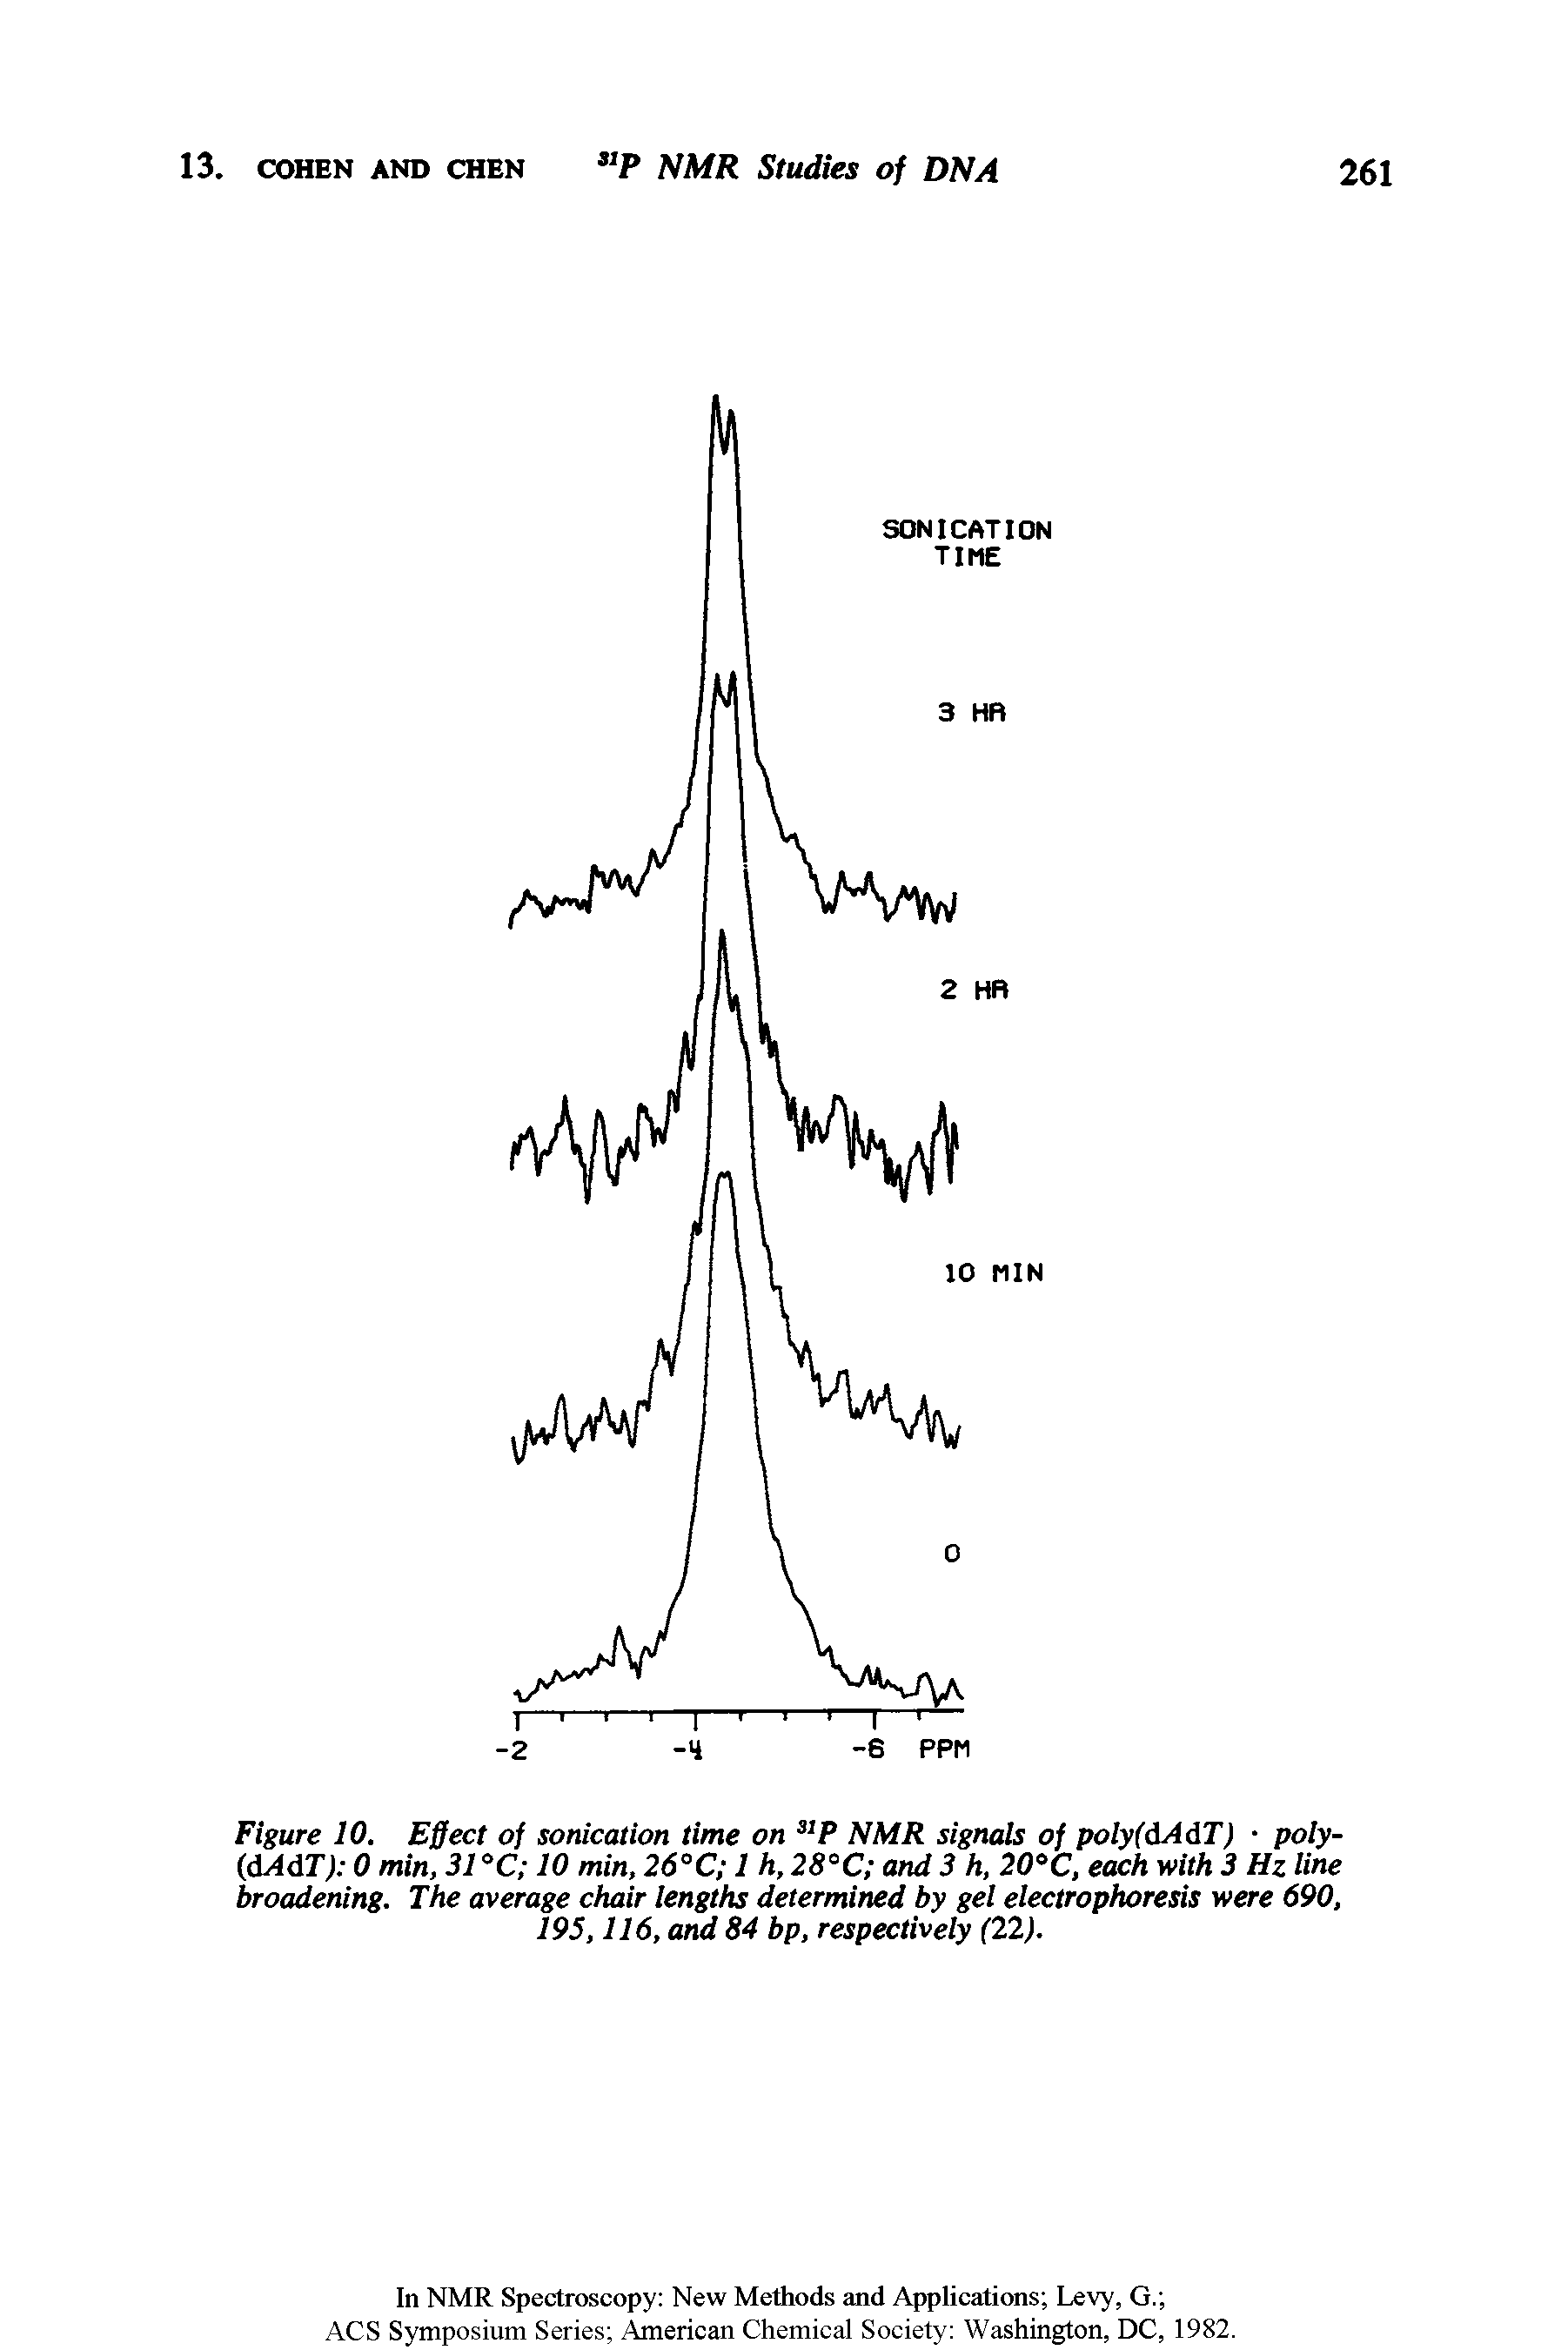 Figure 10. Effect of sonication time on P NMR signals of poly(dAdT) poly-(AAdT) 0 min, 31 C 10 min, 26°C 1 h, 28 C and 3 h, 20 C, each with 3 Hz line broadening. The average chair lengths determined by gel electrophoresis were 690, 195,116, and 84 bp, respectively (22).